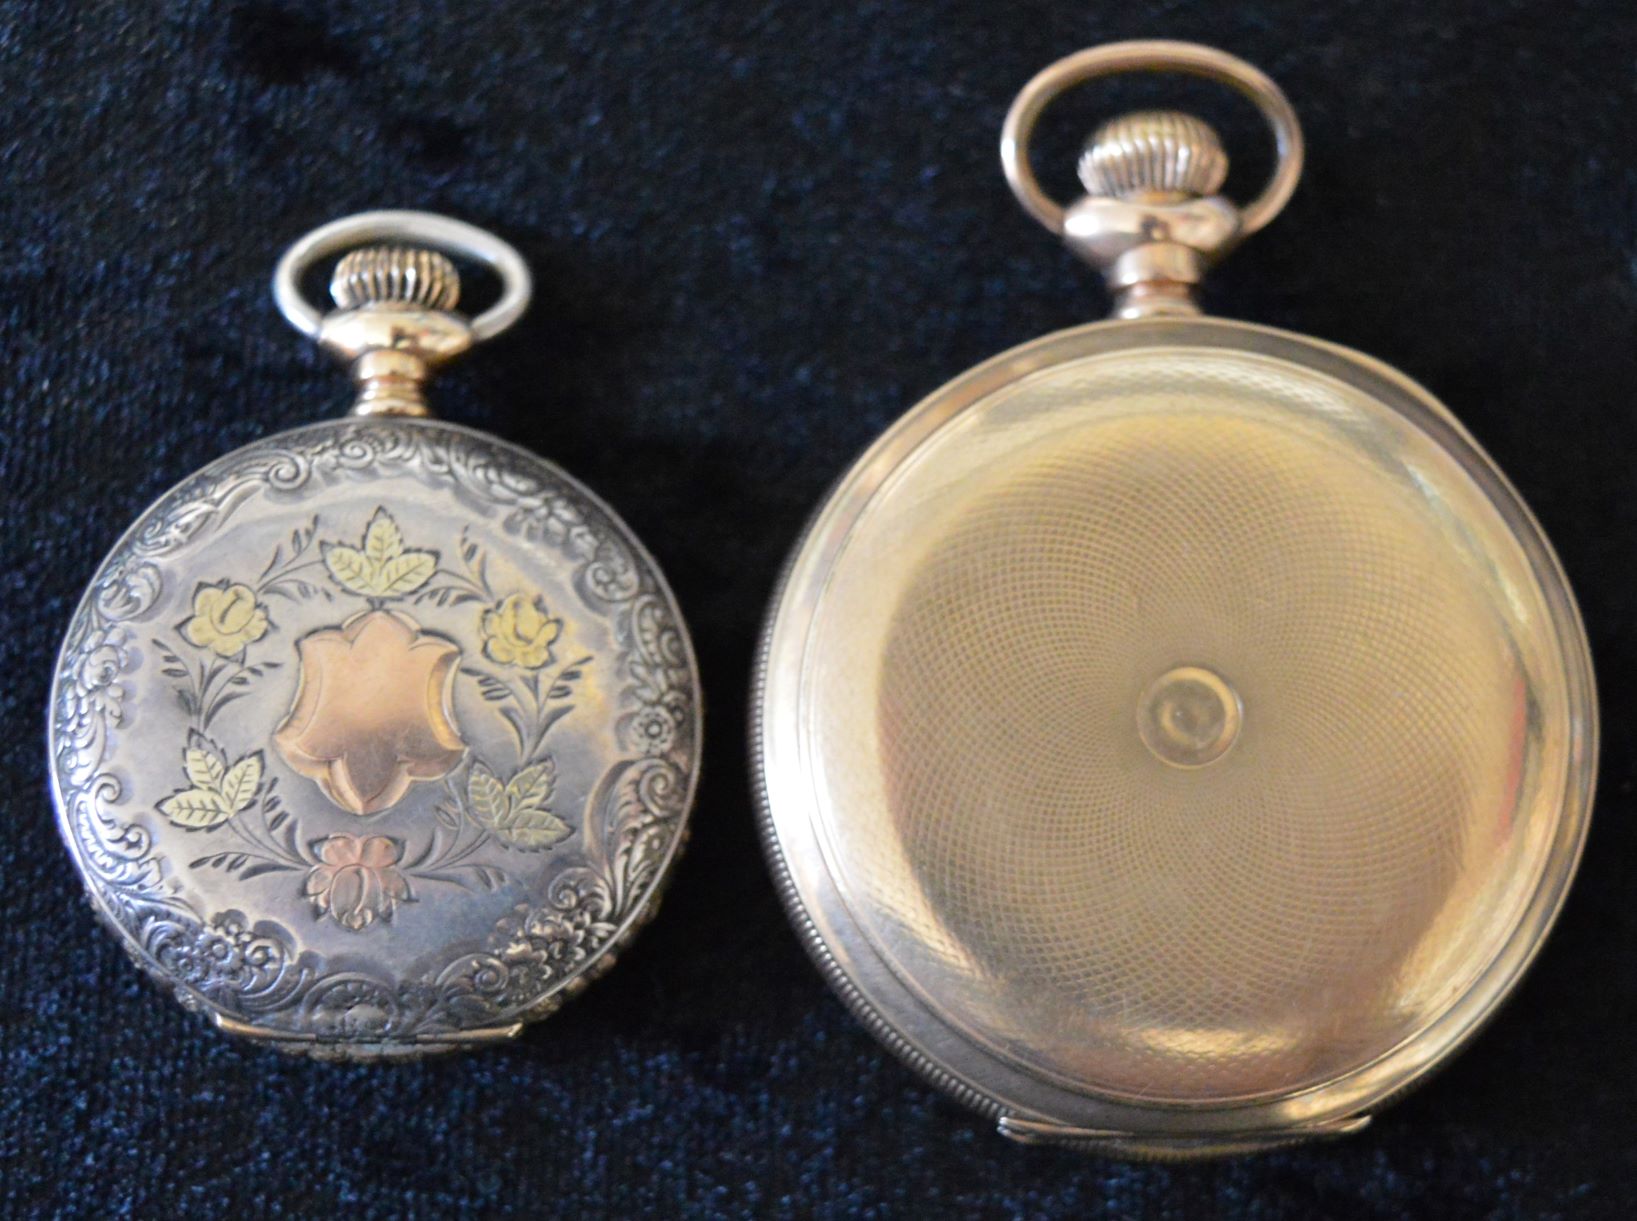 Waltham gold plated hunter pocket watch & a silver plate fob watch (on both watches the hour hand